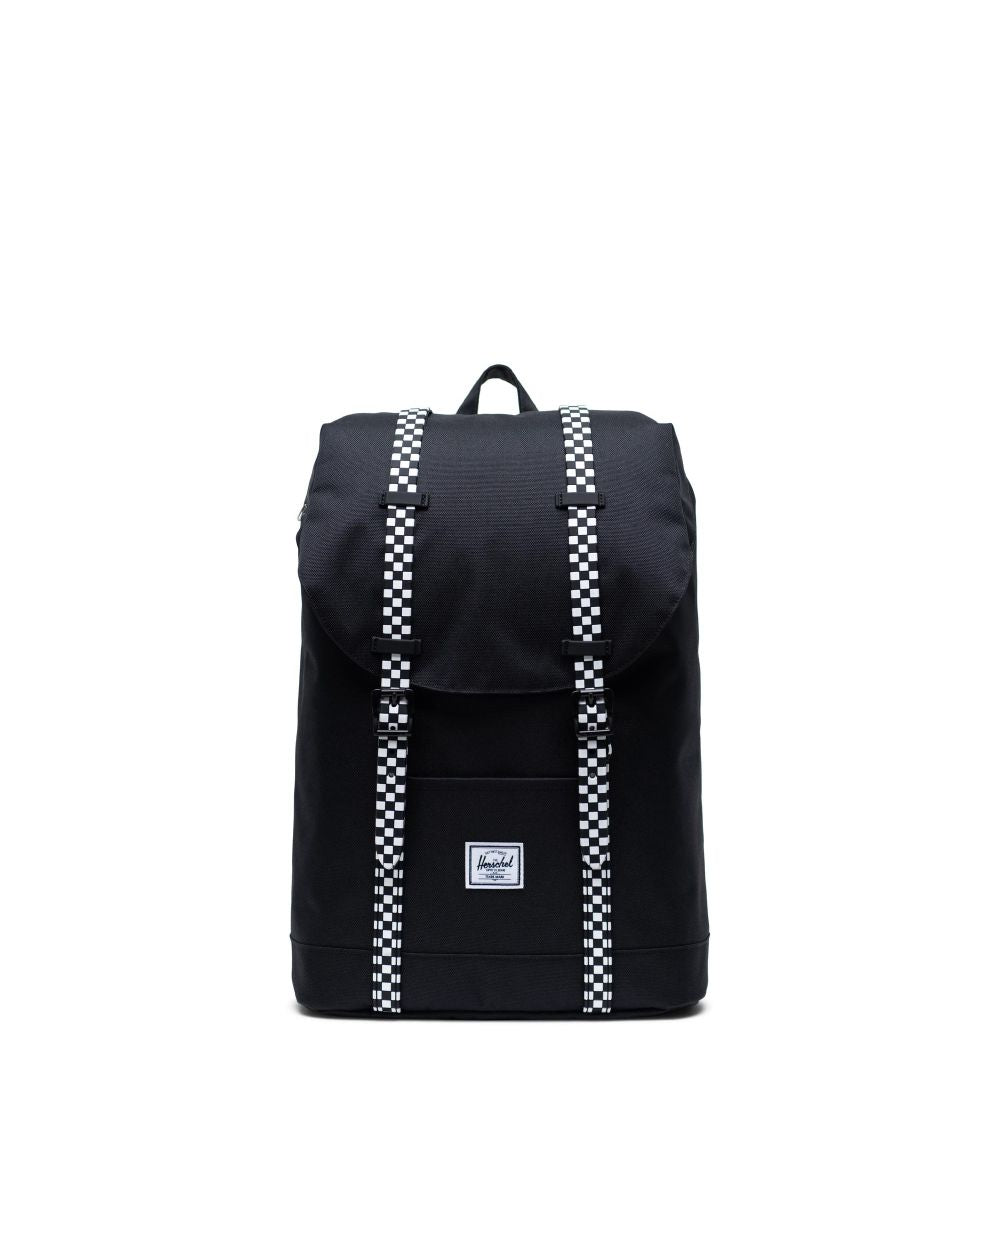 Retreat Backpack | Youth